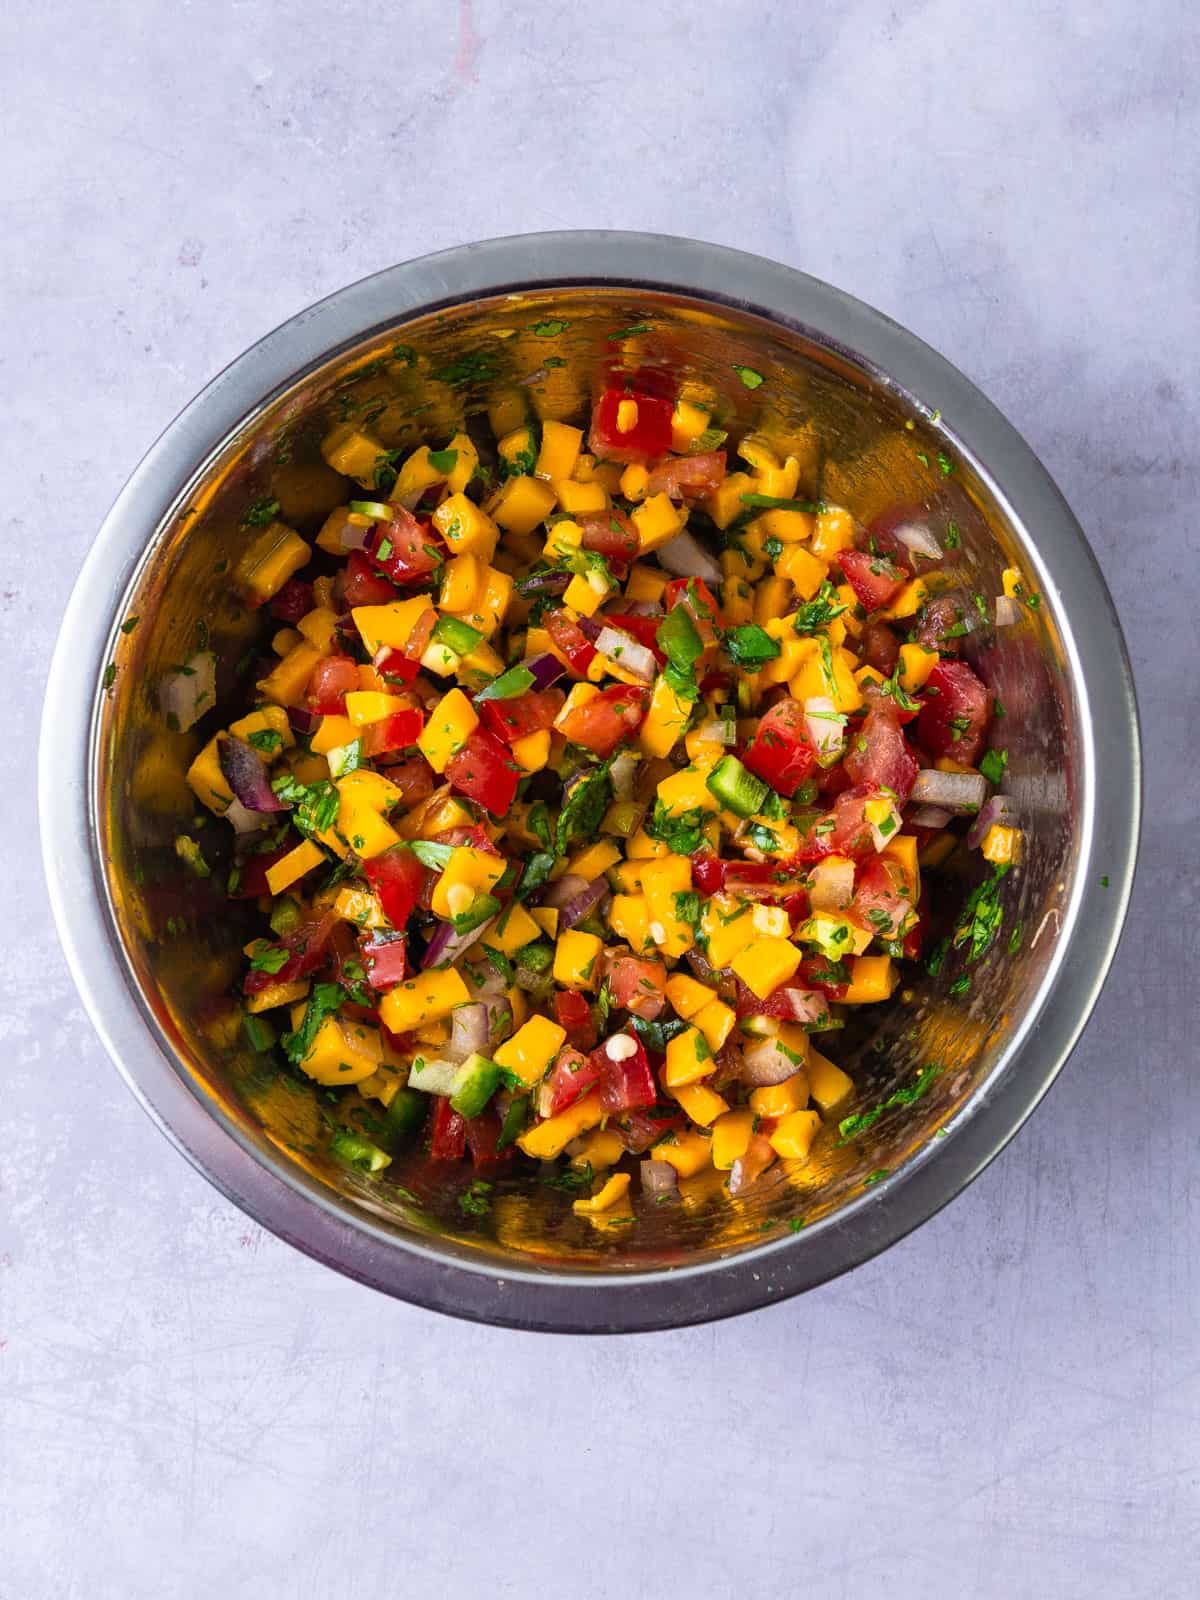 Mix all of the mango pico de gallo ingredients together in a bowl.